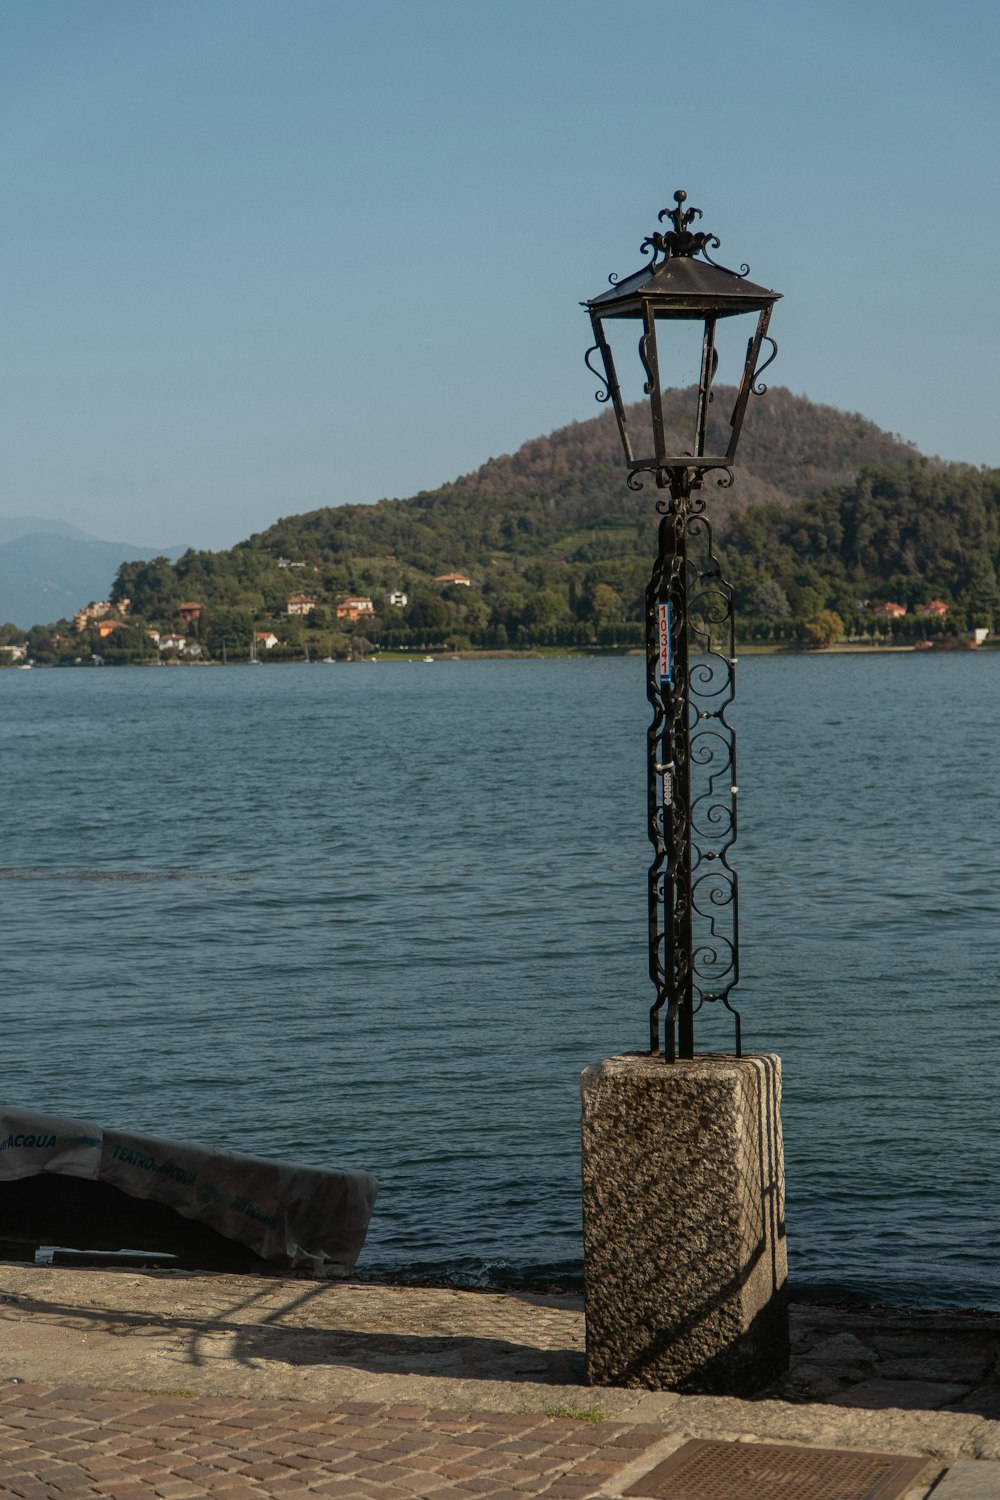 a lamp post next to a body of water